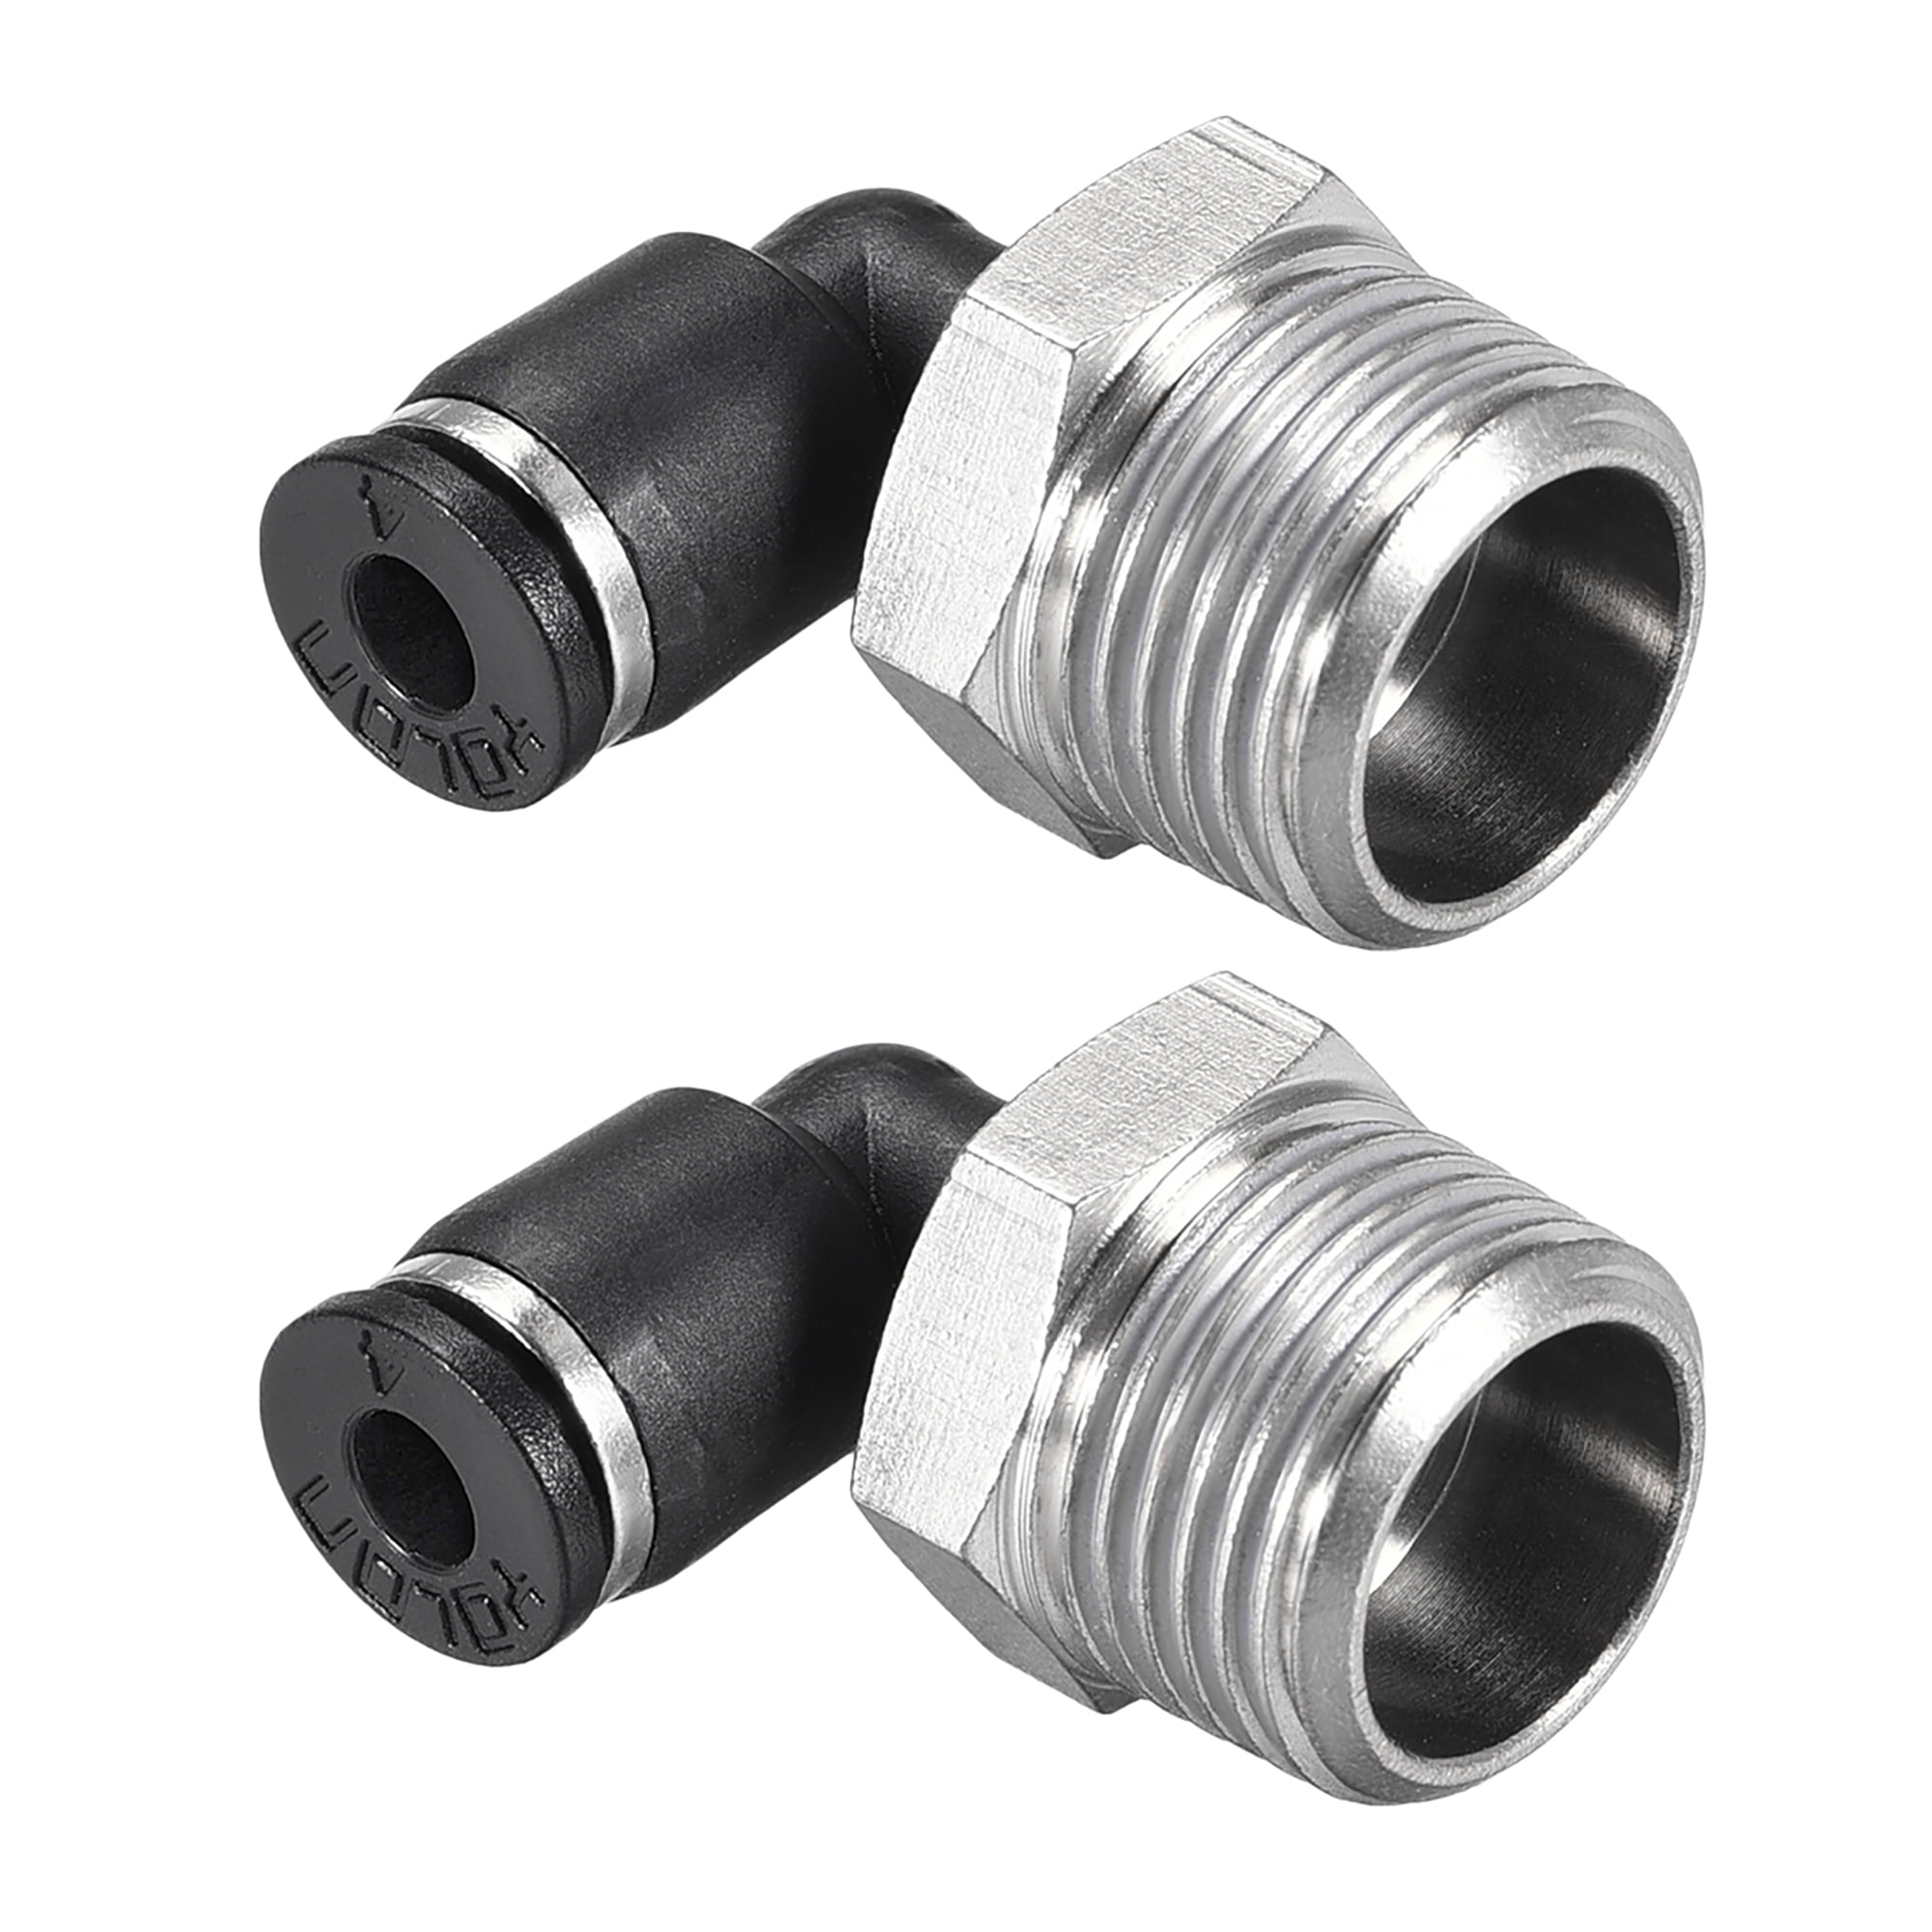 Air Pneumatic Push In Connector Male Elbow Fitting 4 mm OD*1/8" NPT